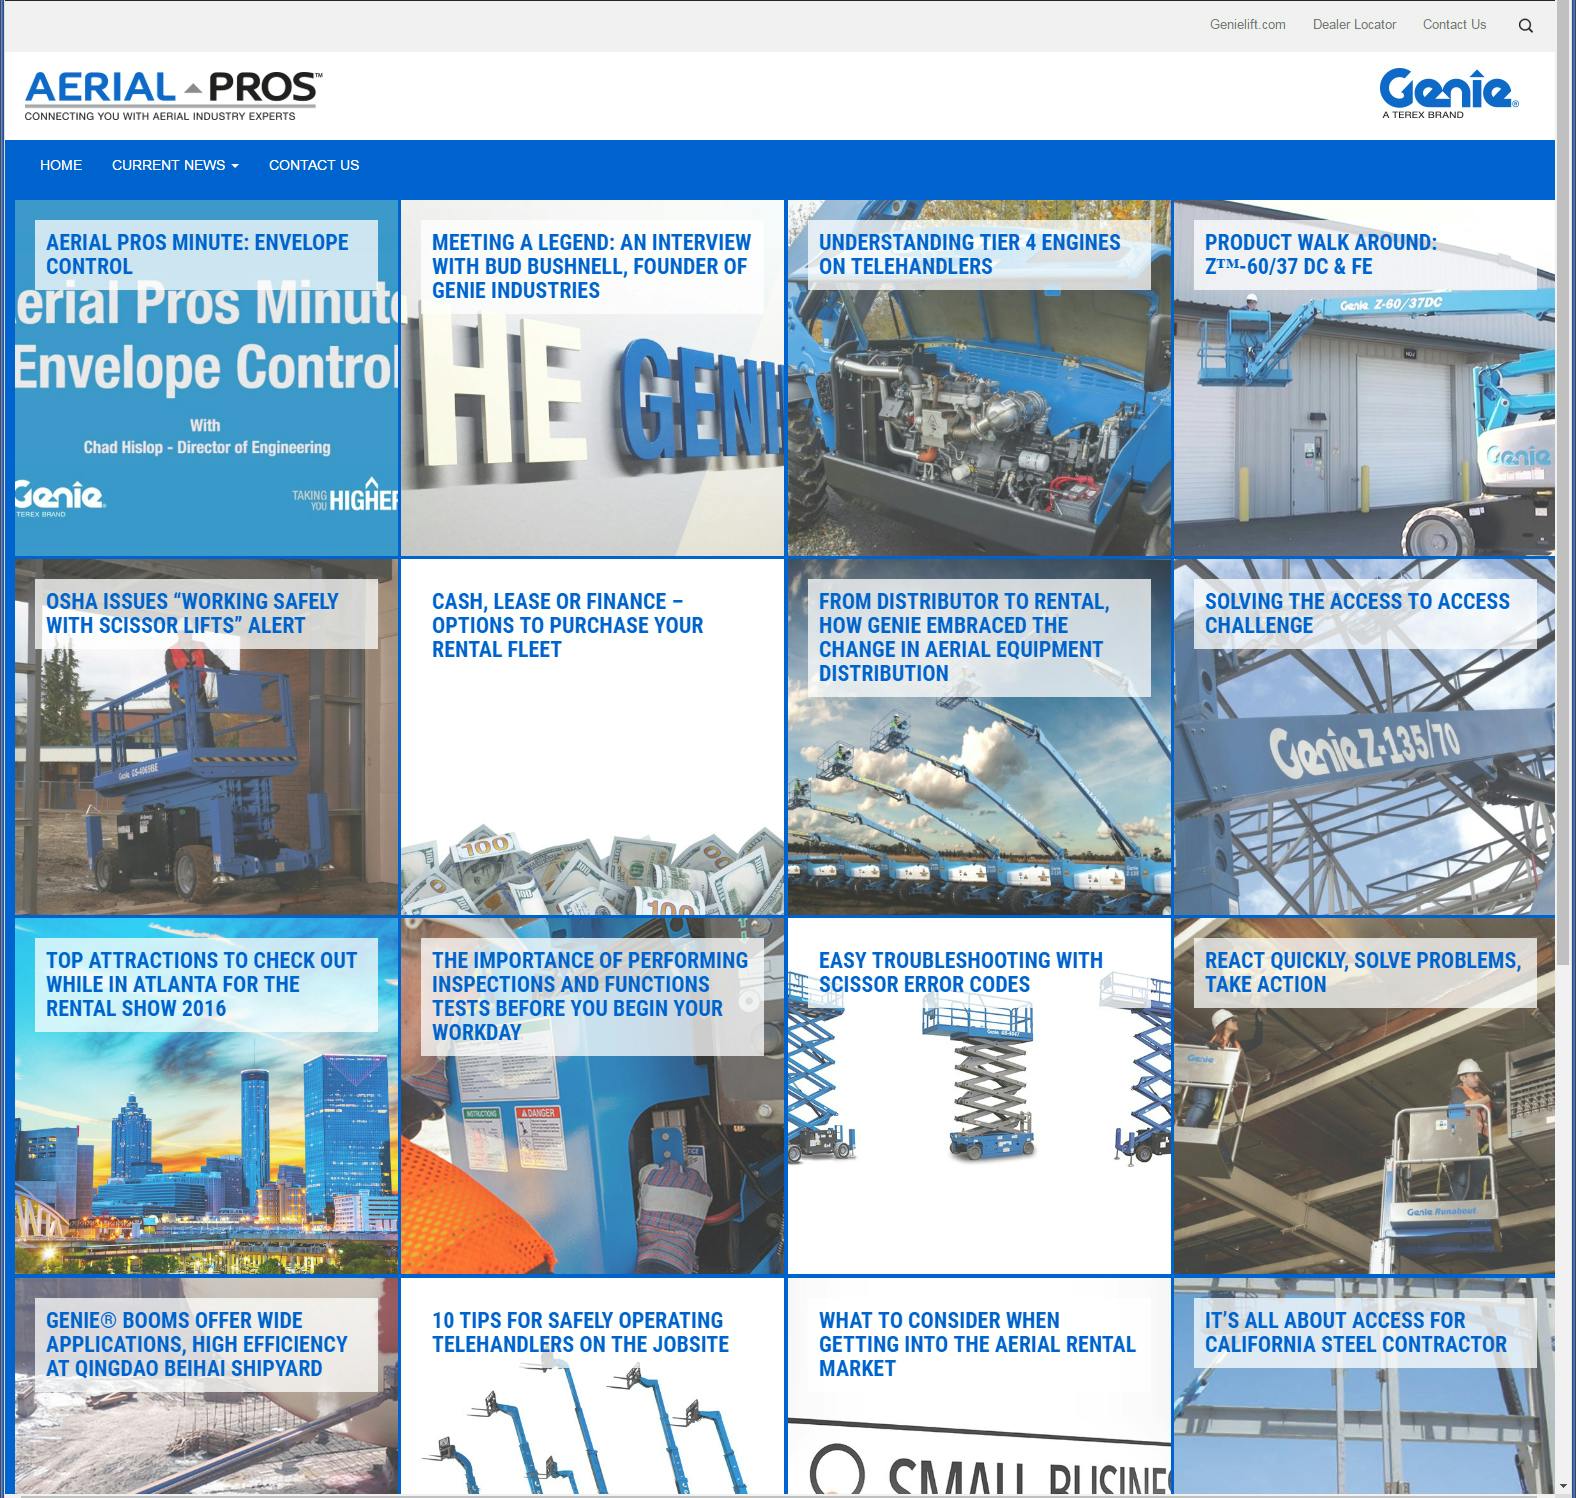 Genie "Ask Me Anything" Online Event Set for Jan. 23-27 | Construction News